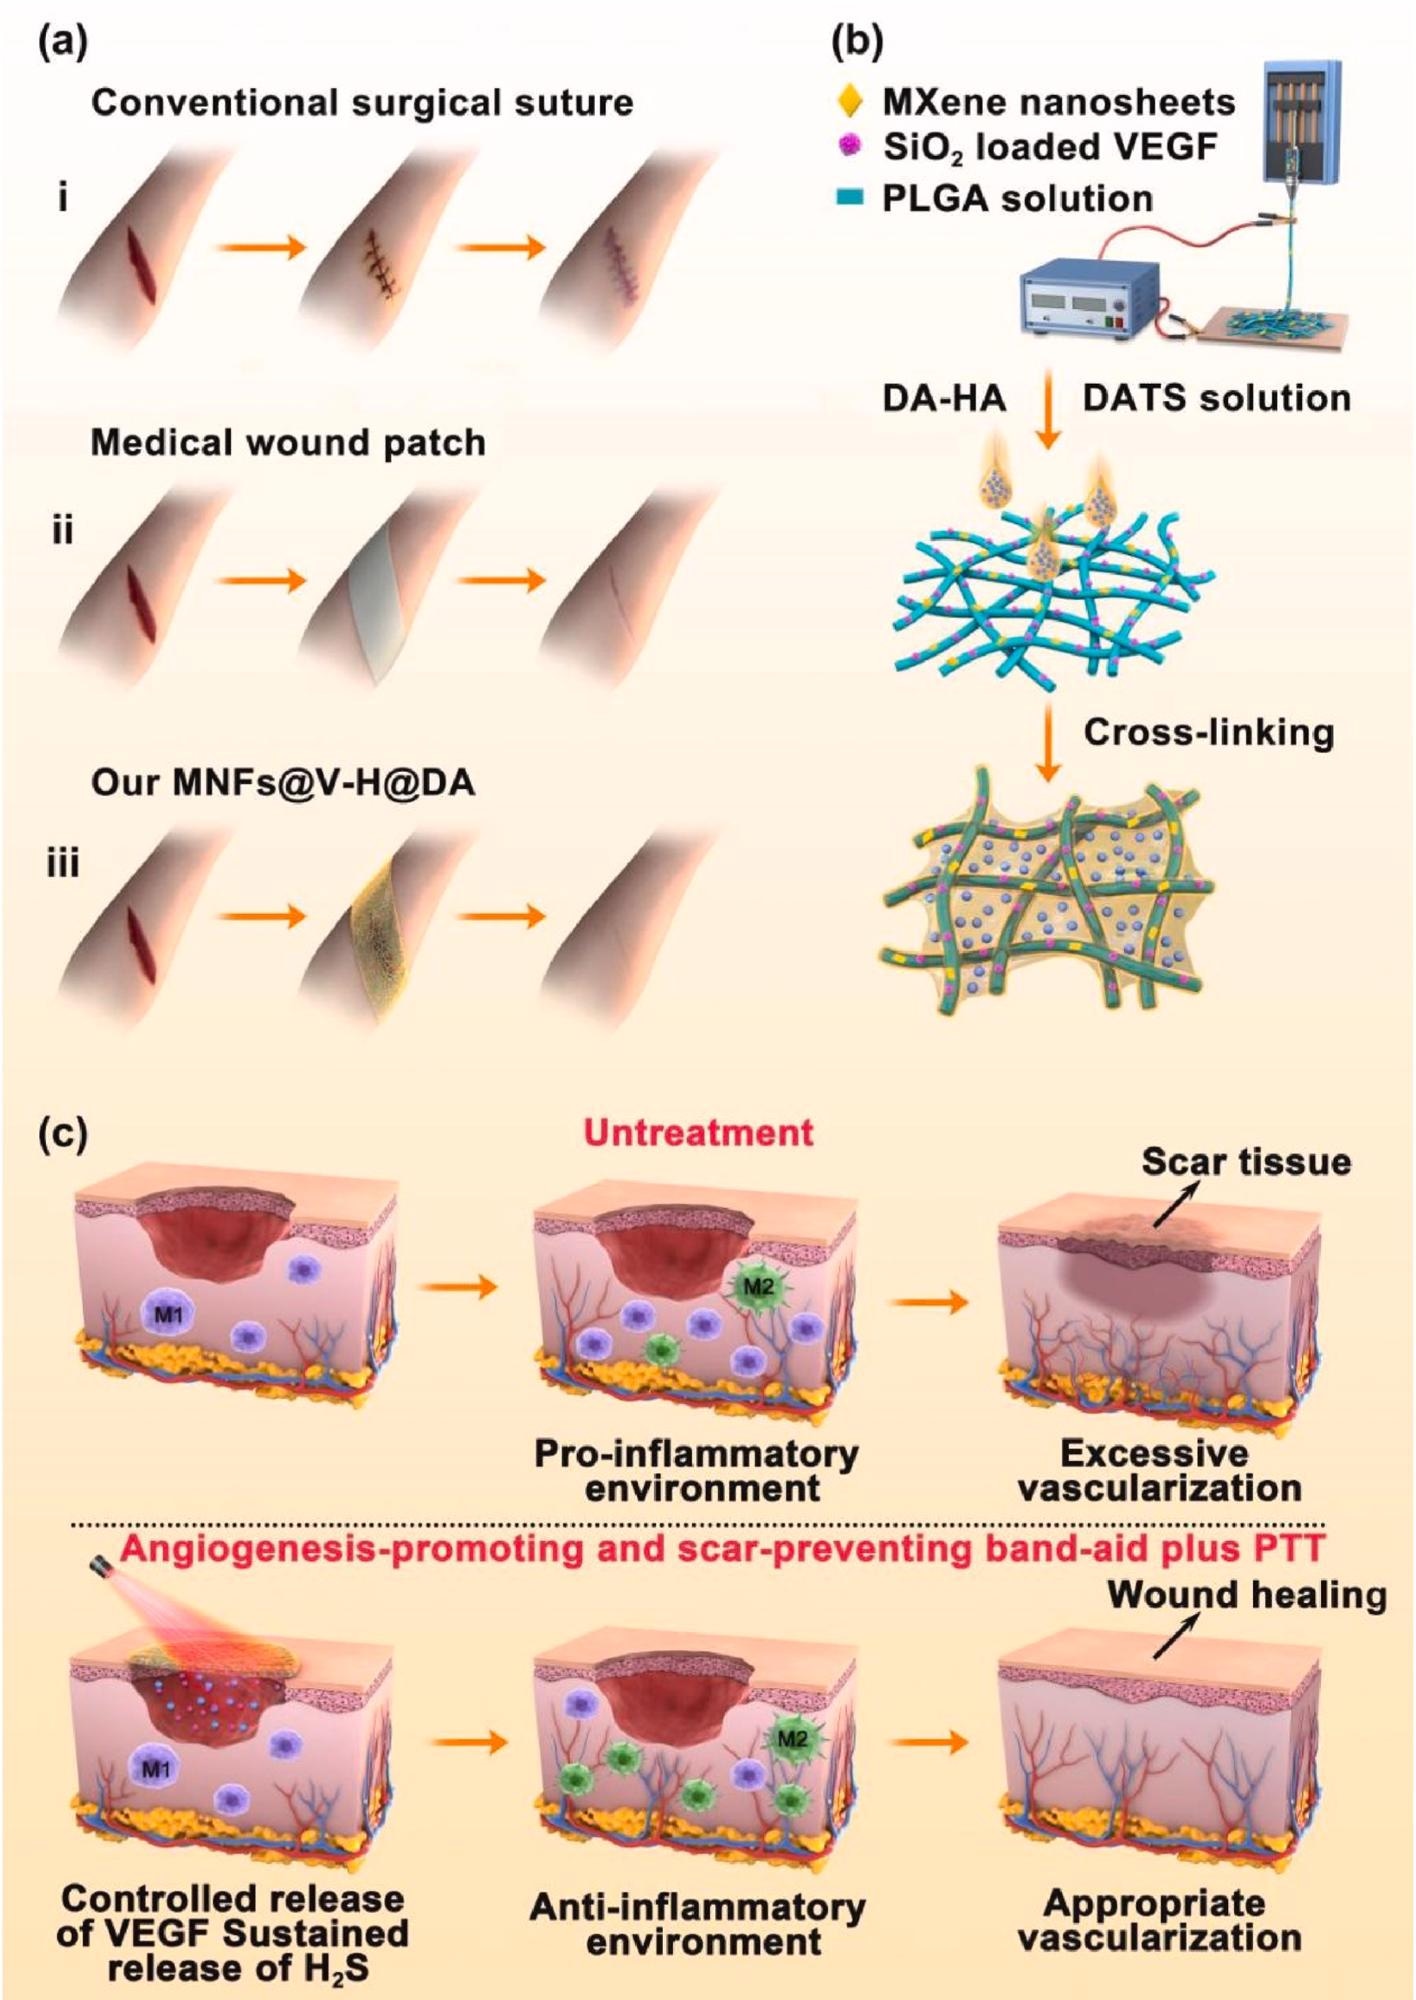 Preparation process, and wound healing process of MNFs@V–H@DA. Various wound healing materials (a), i: traditional surgical suture, ii: medical wound patch, iii: our MNFs@V–H@DA. Scheme of MNFs@V–H@DA fabrication by electrospinning process and surface coating (b). The mechanism of MNFs@V–H@DA on wound healing (c).